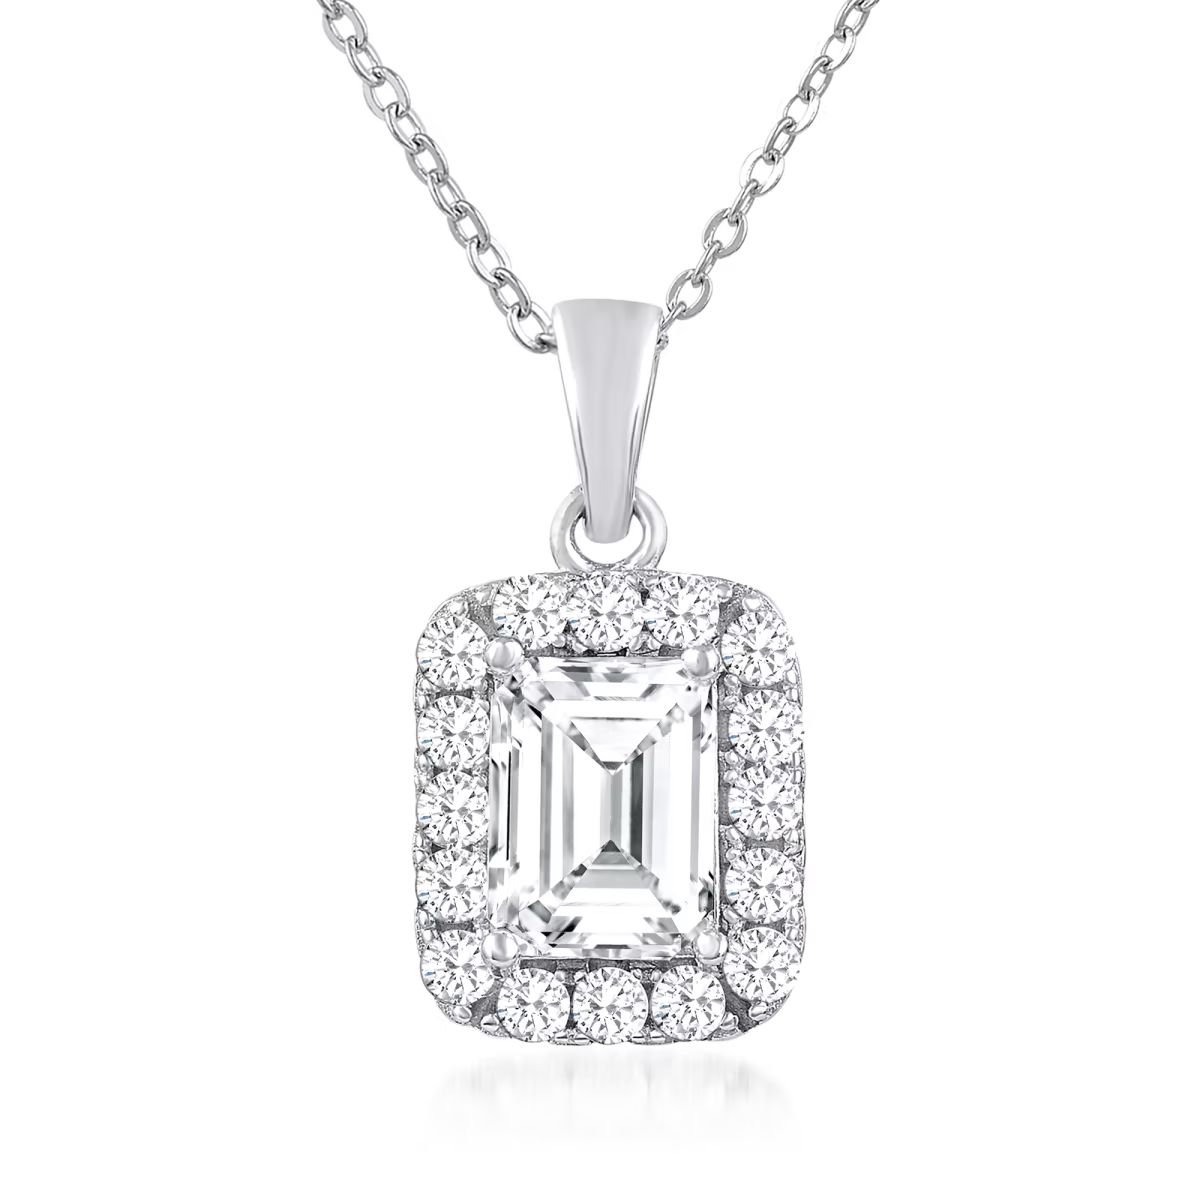 2.10 ct. t.w. Moissanite Pendant Necklace in Sterling Silver. 18" | Ross-Simons